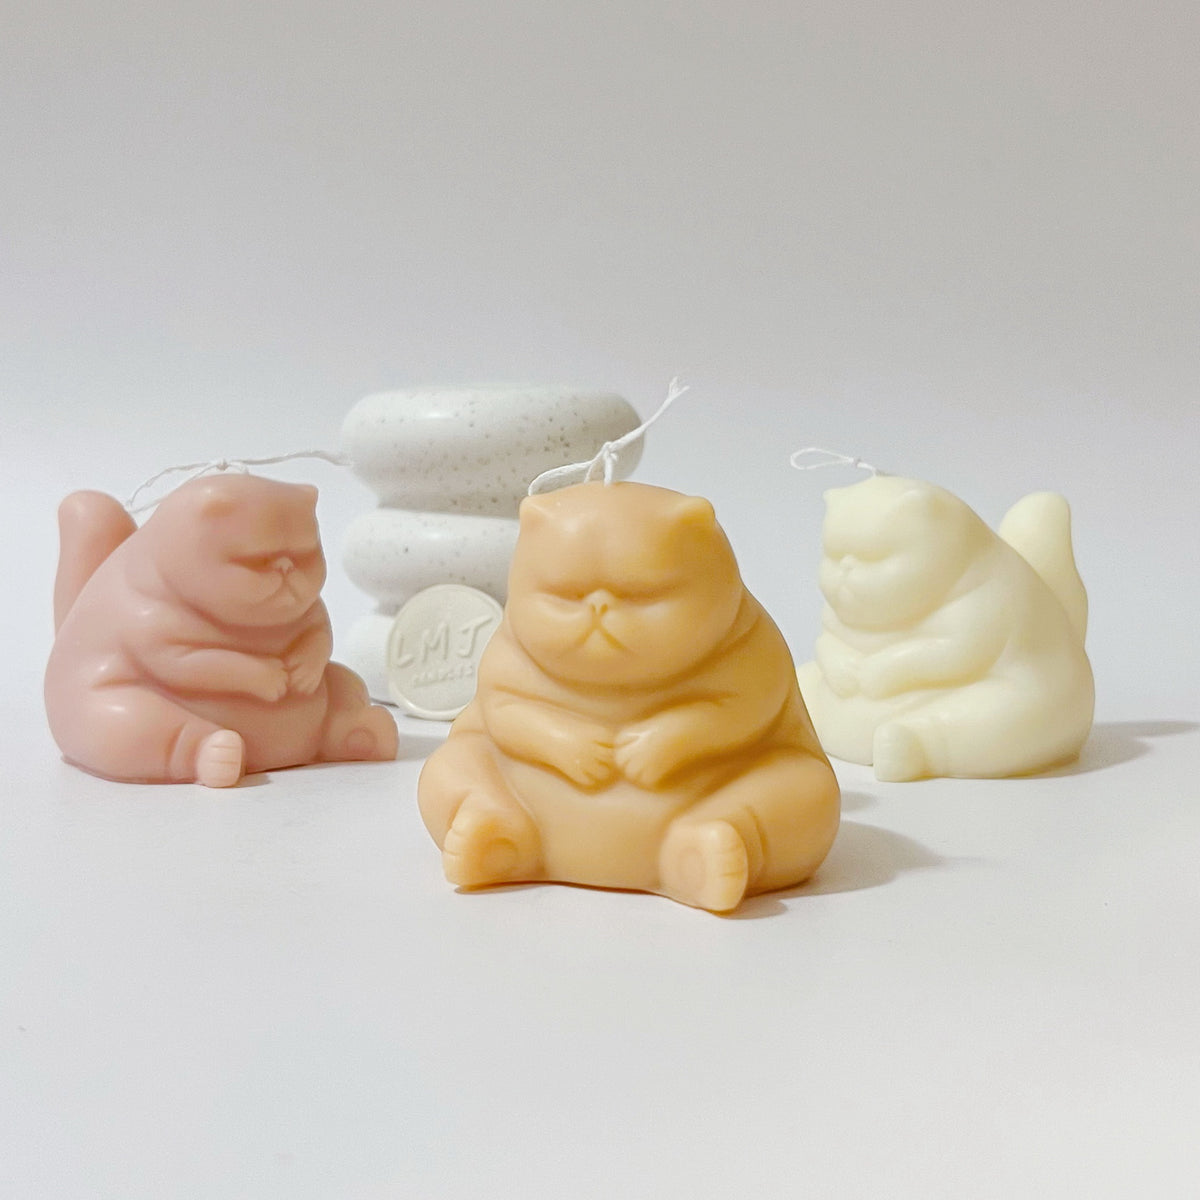 Handmade soy wax animal candles for your home décor. Choose from cute decorative teddy bear candle, cat candle, dog candles, lion candle, monkey candle, bunny candle and more | LMJ Candles